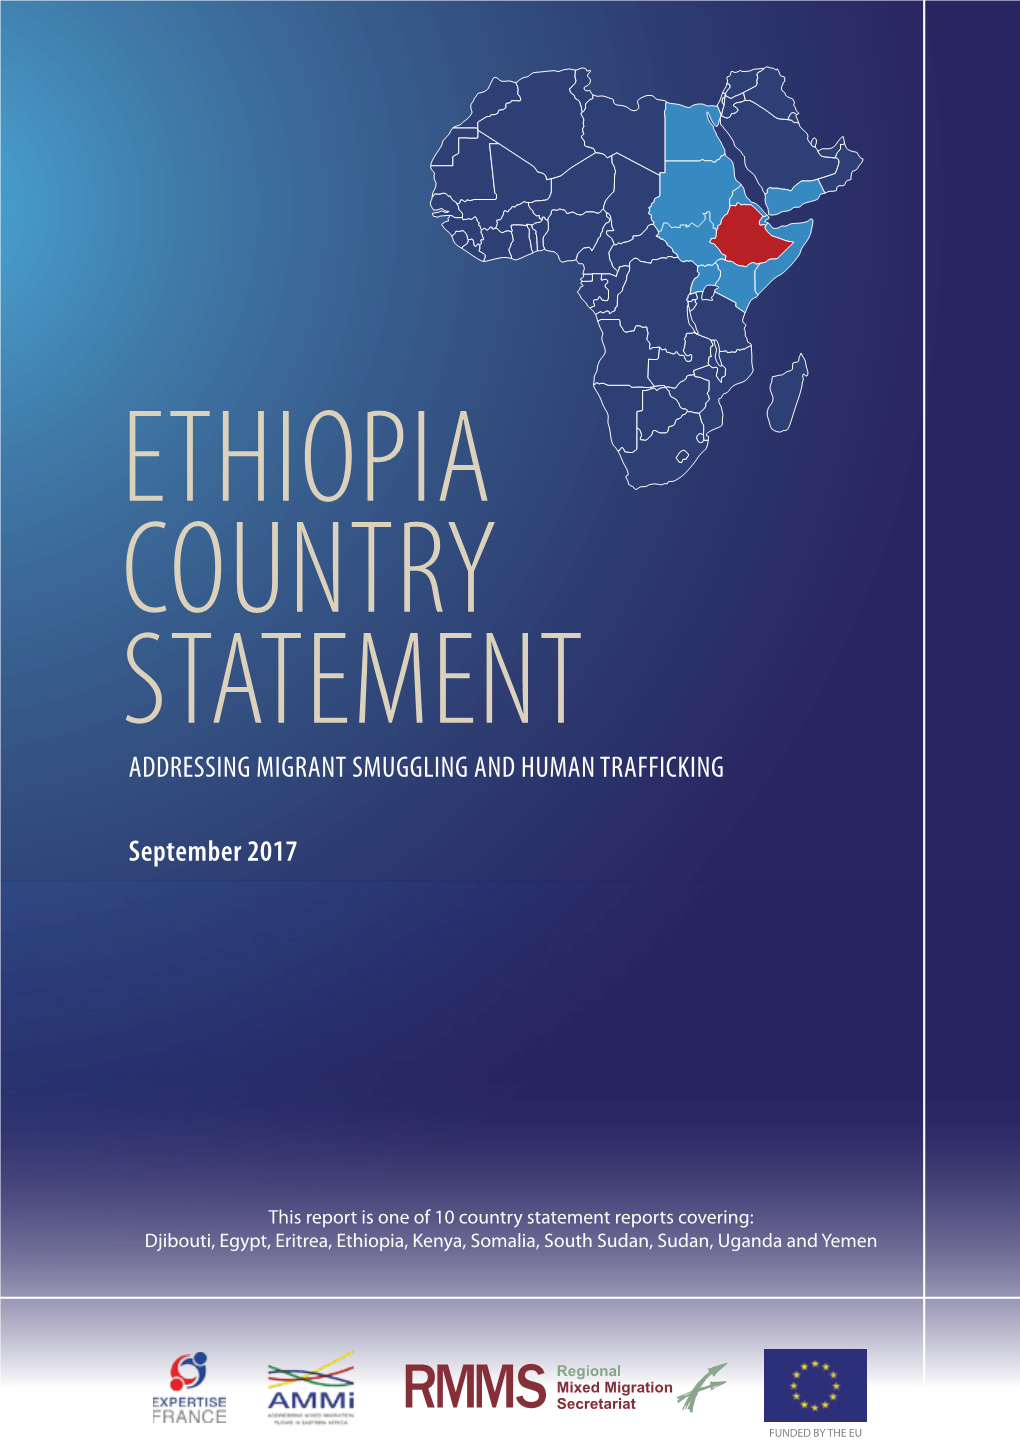 Ethiopia Country Statement: Addressing Migrant Smuggling and Human Trafficking in East Africa